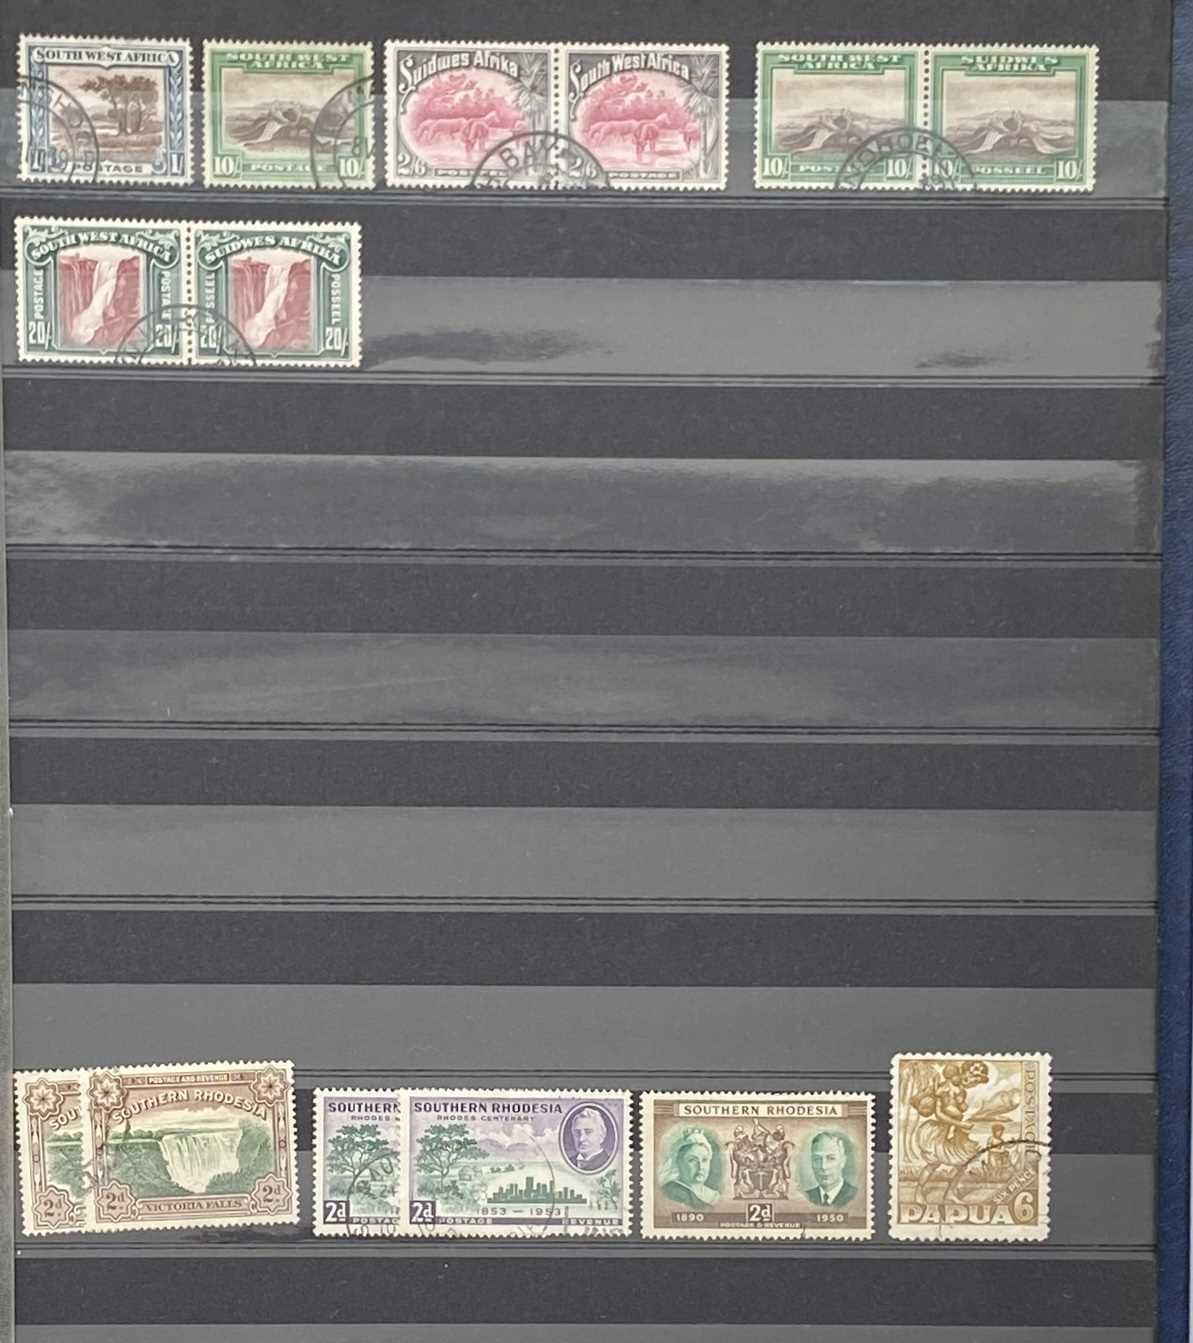 COMMONWEALTH GV1 - fine used collection of many countries, full sets and top values, good quality - Image 2 of 17